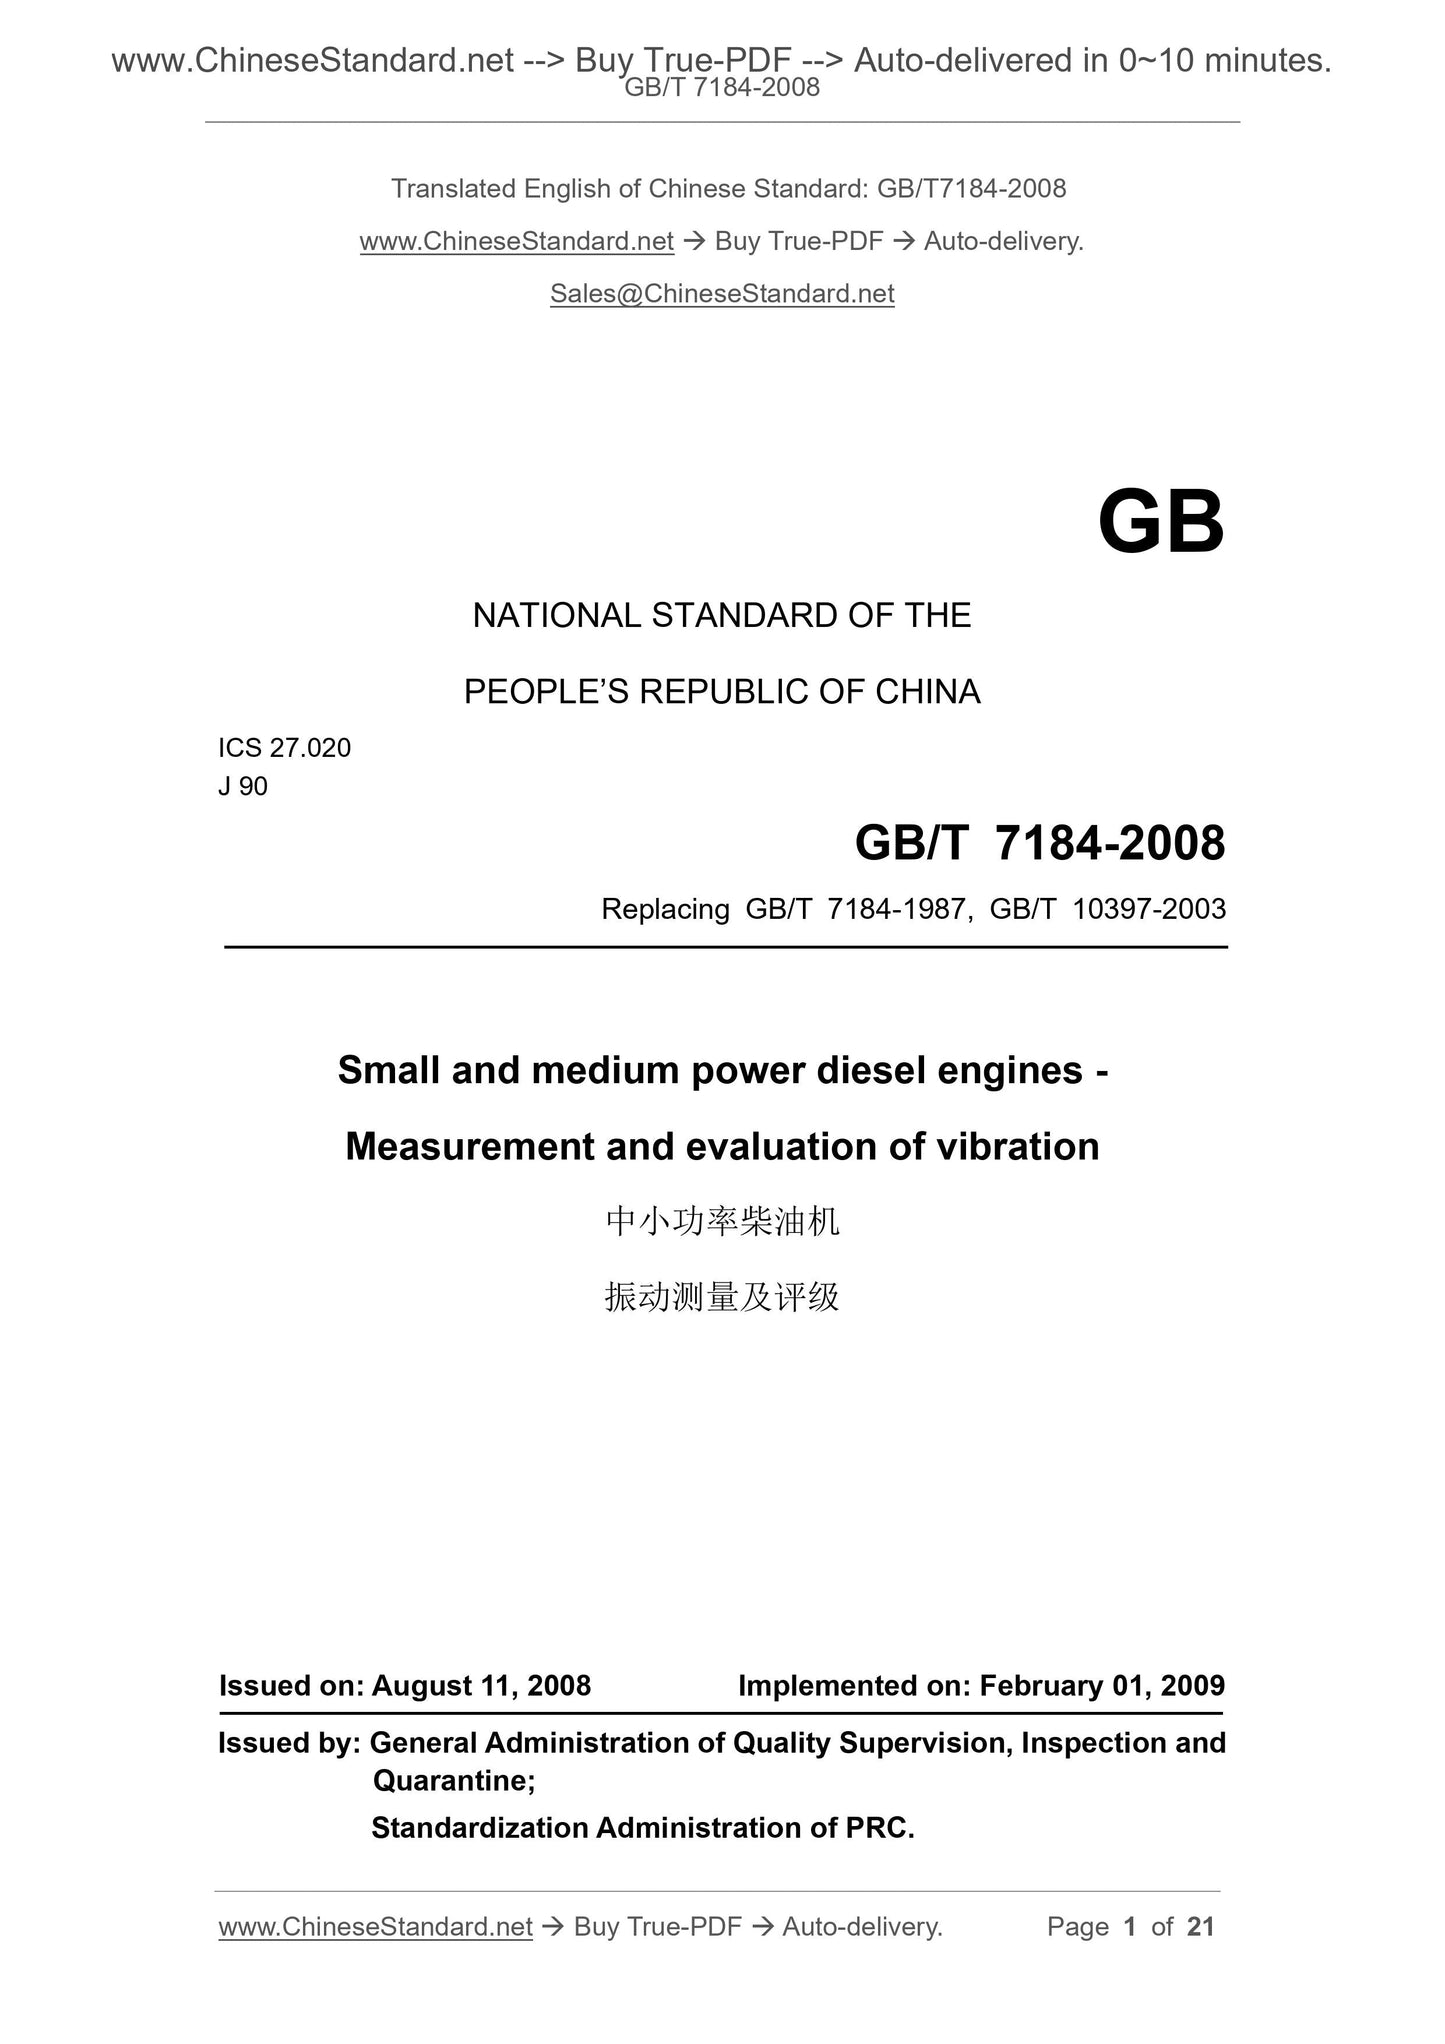 GB/T 7184-2008 Page 1